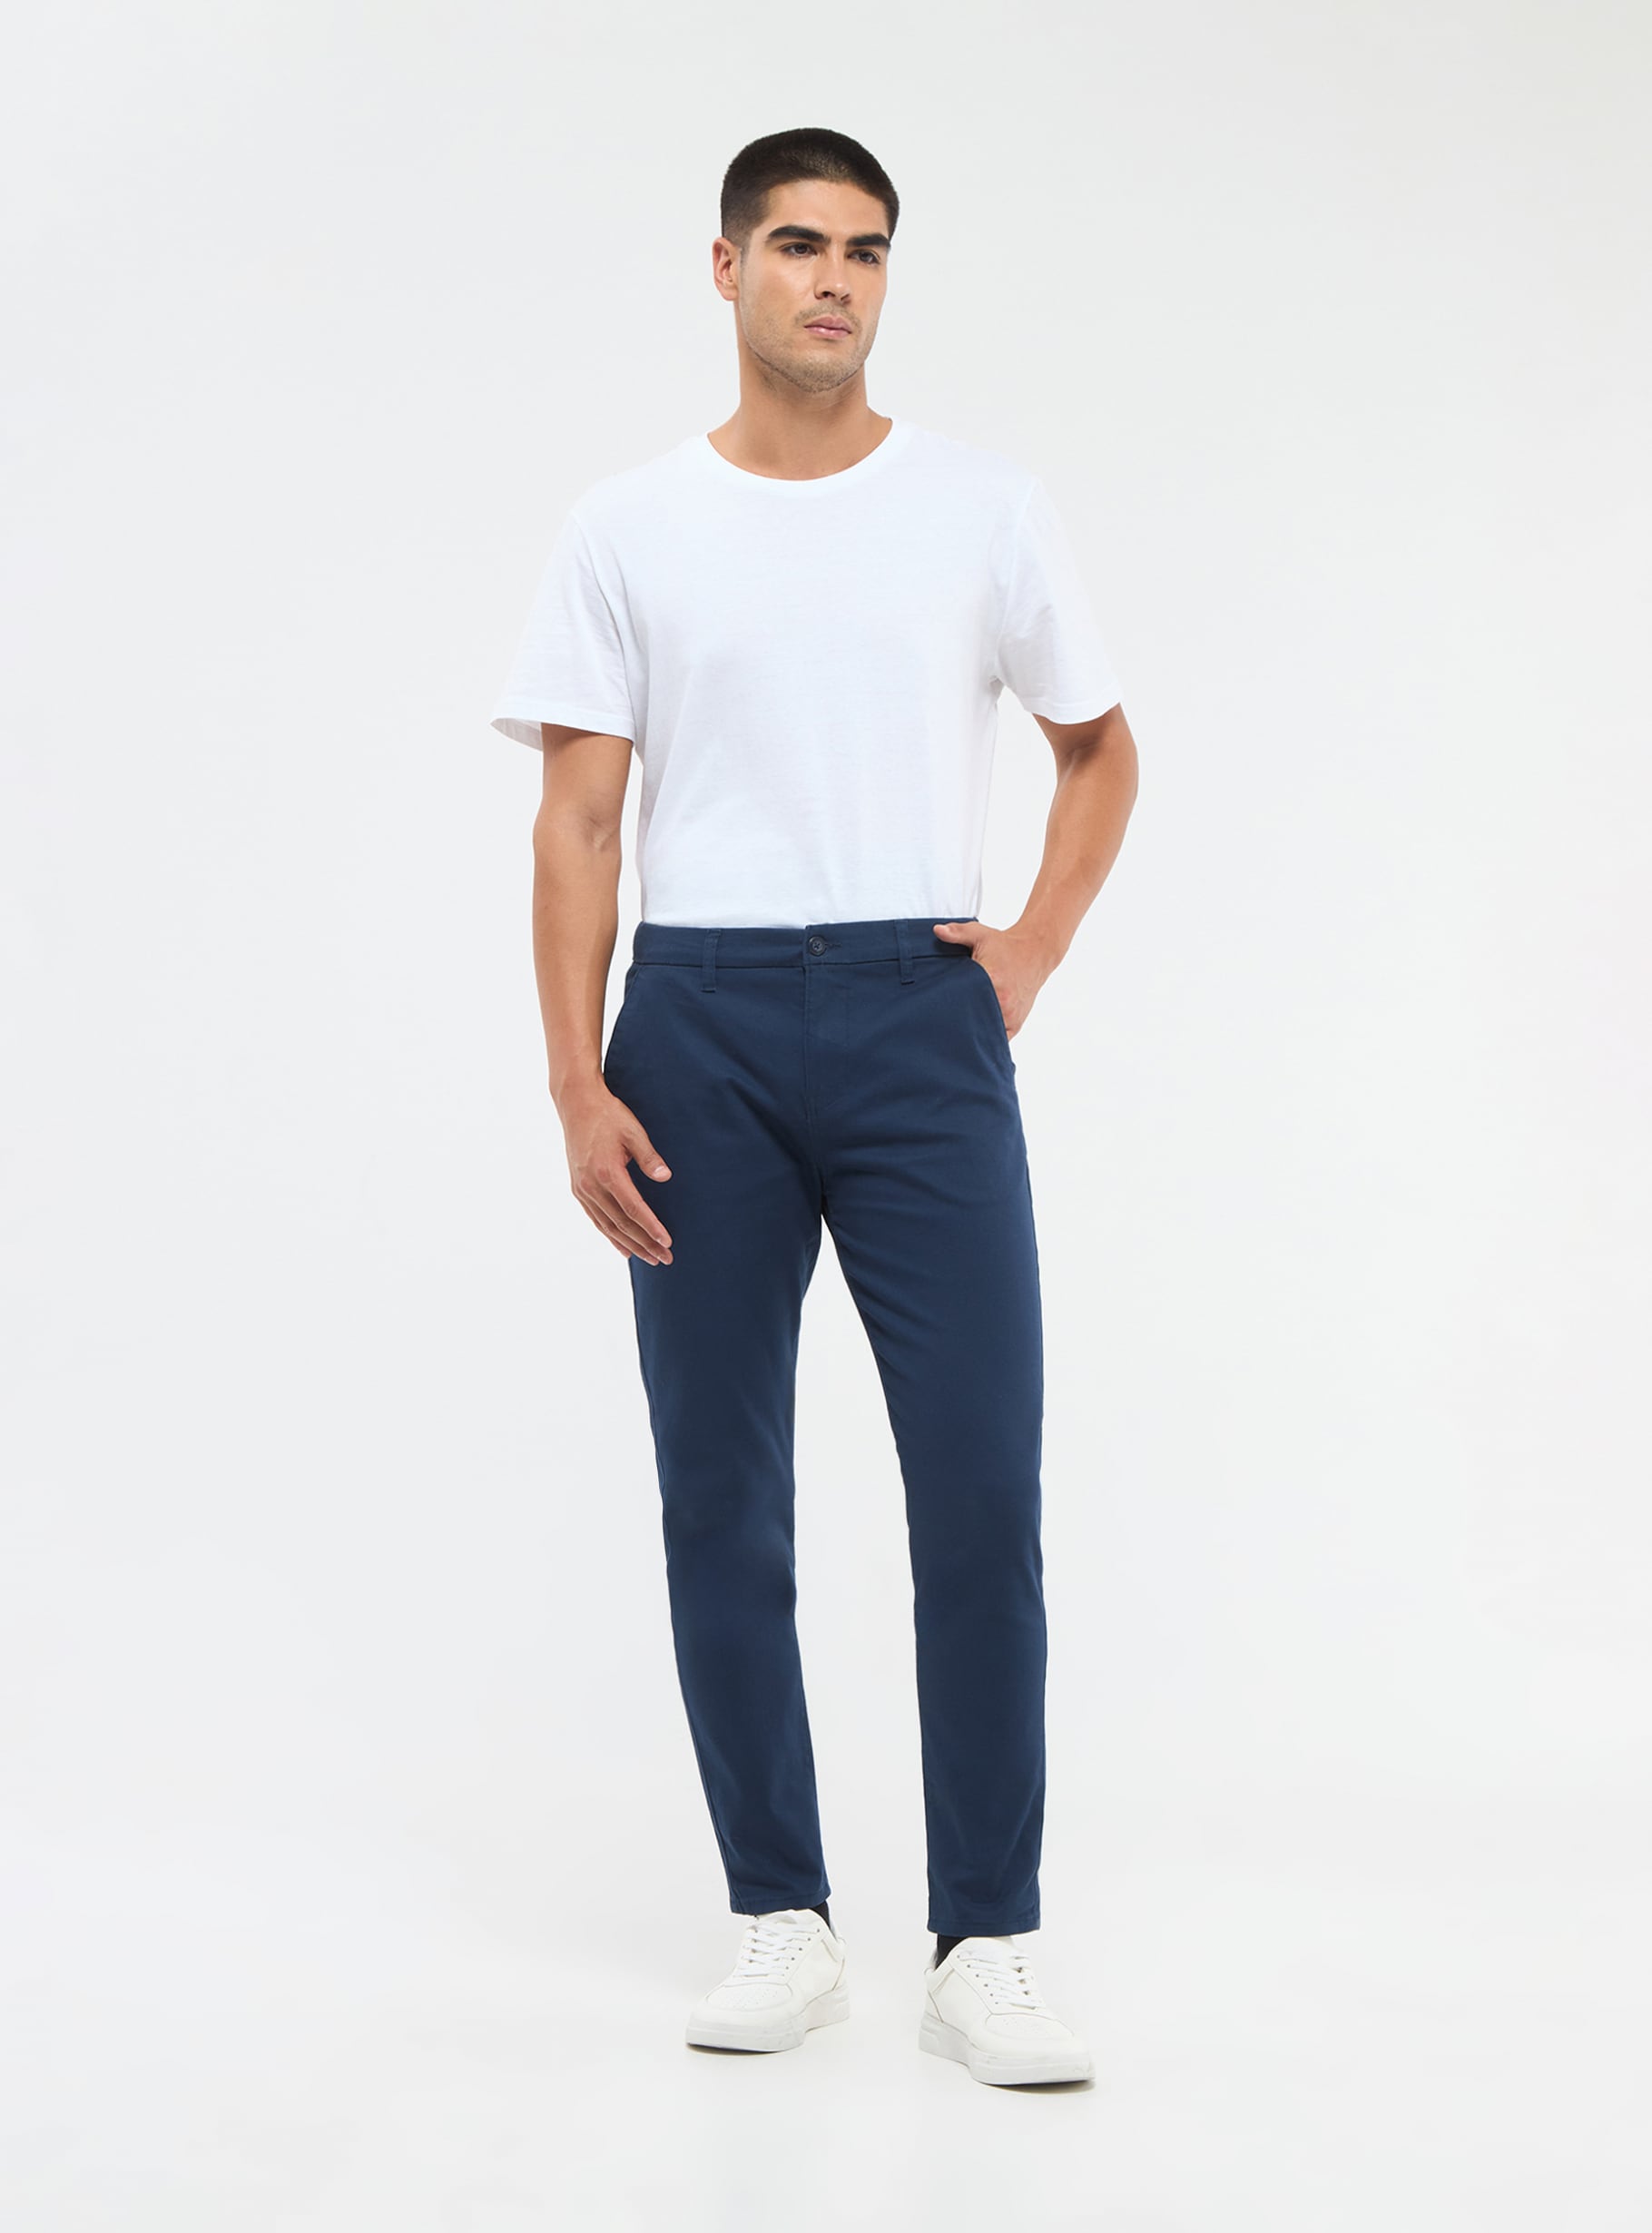 Blue Trousers - Buy Latest Blue Trousers Online in India | Myntra